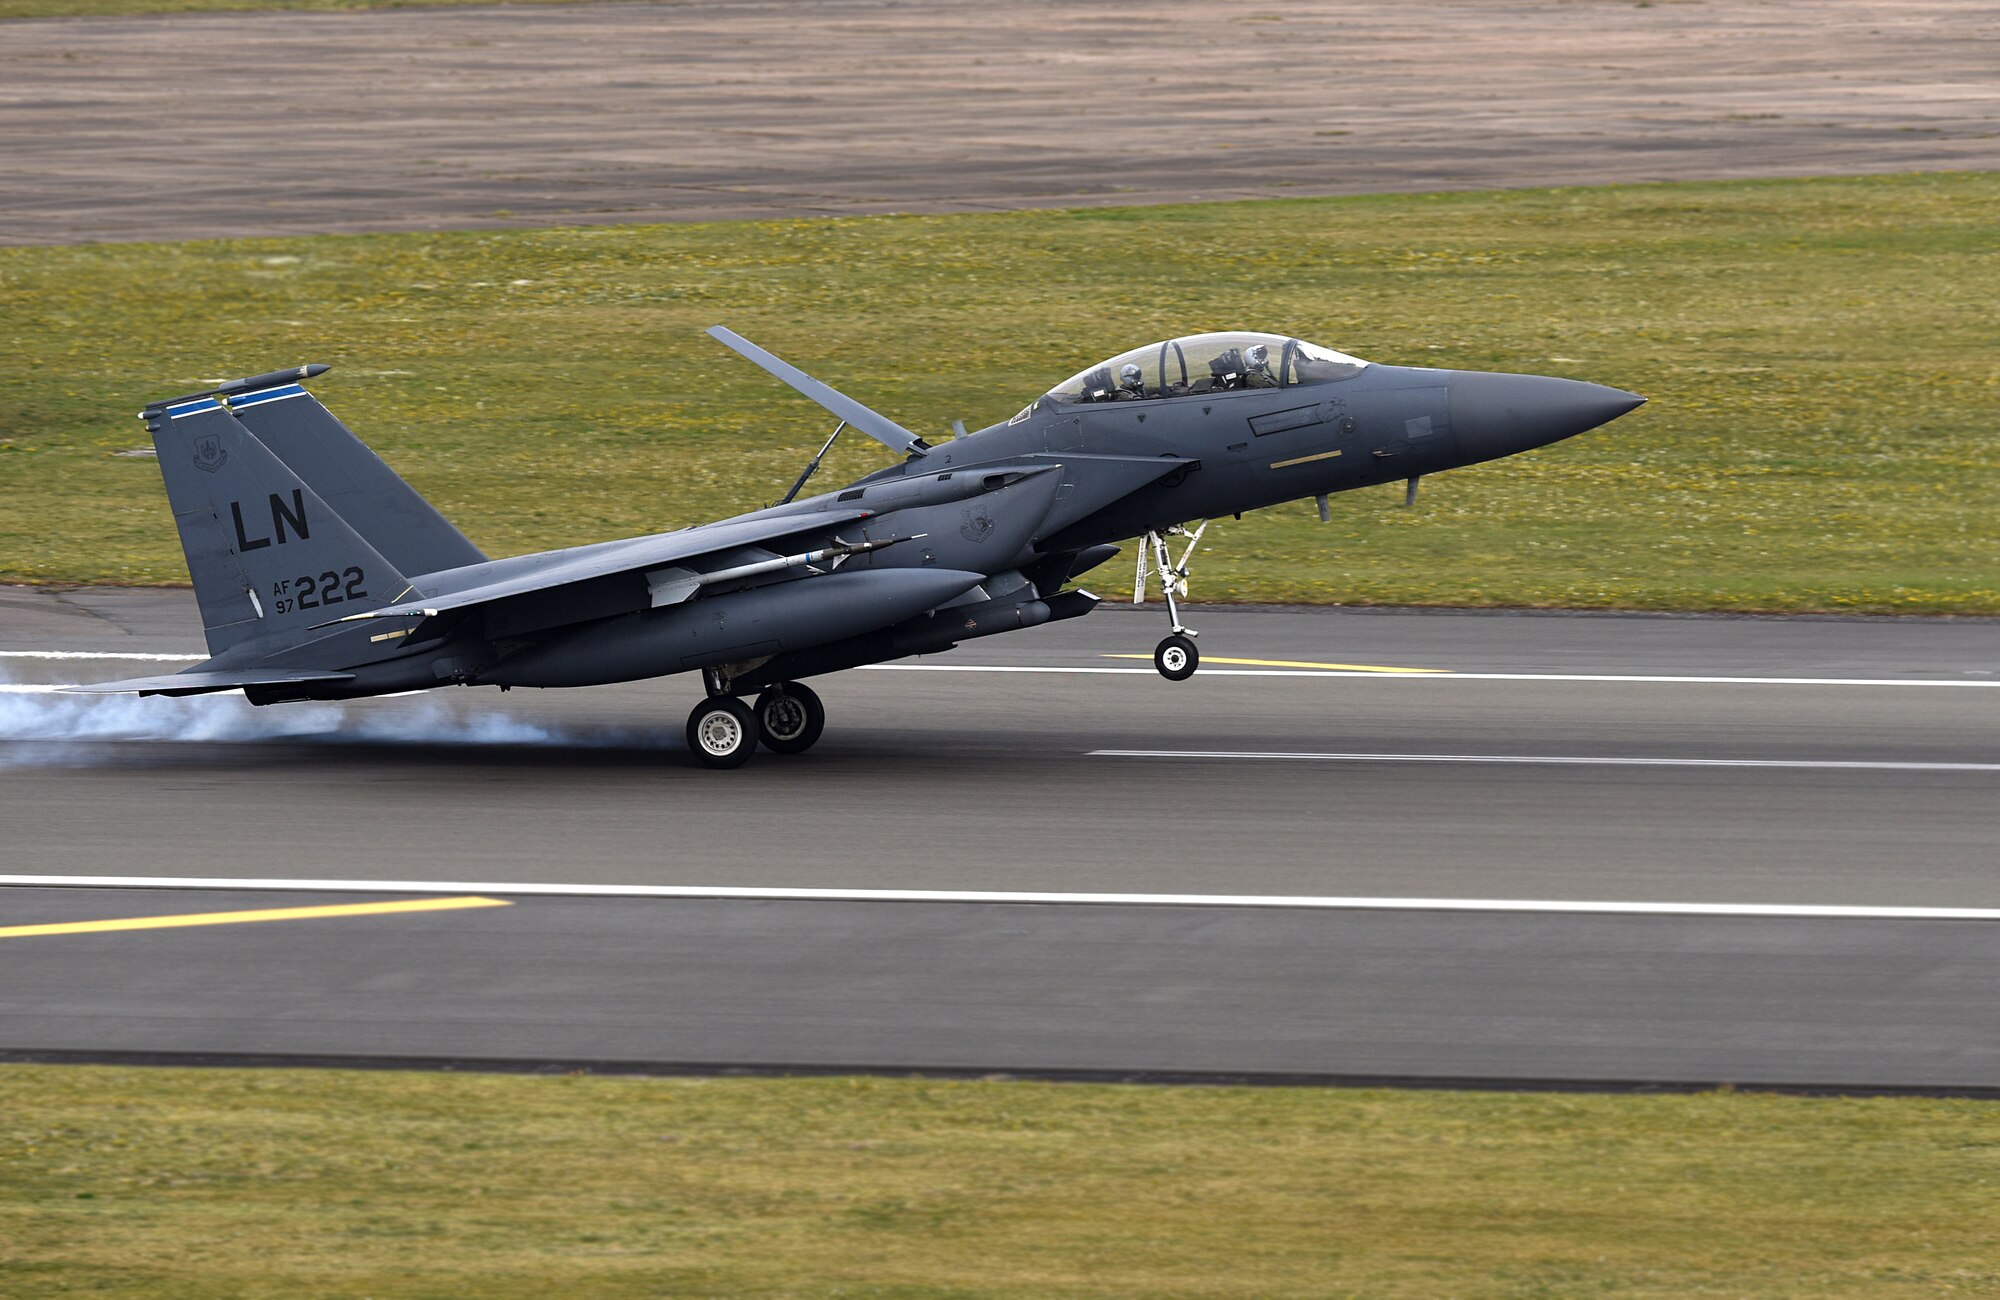 An F-15E Strike Eagle assigned to the 492nd Fighter Squadron lands on the flight line at Royal Air Force Lakenheath, England, April 23, 2019. The 48th Fighter Wing is participating in a readiness exercise from 23-25 April focused on continuous operations over a 48-hour period. (U.S. Air Force photo by Airman 1st Class Madeline Herzog)